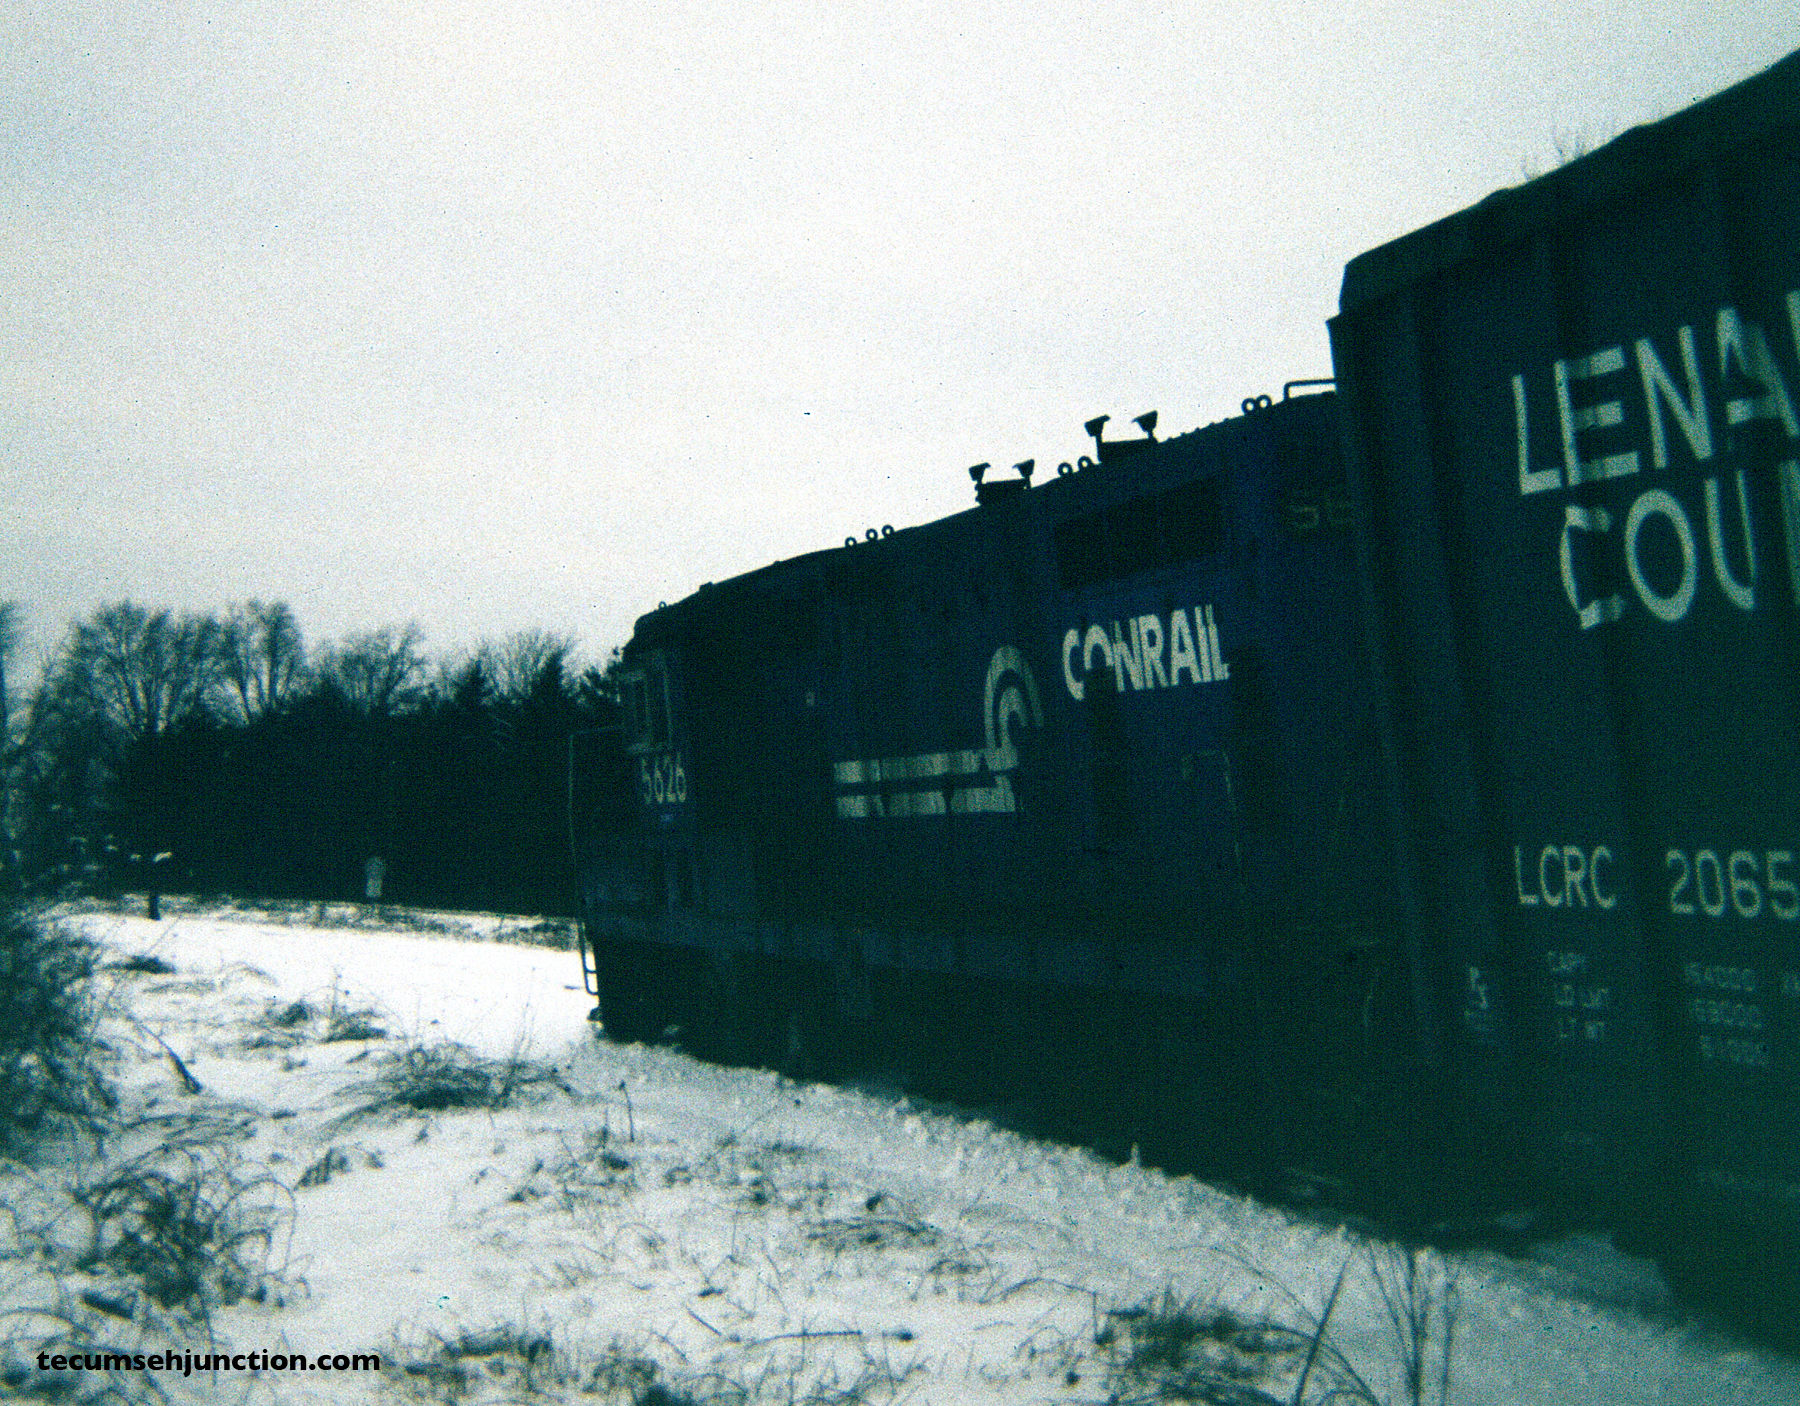 Conrail 5626 rides the curve on the "Old Road" side of the wye at Lenawee Junction, MI, to reach the Lenawee County Railroad interchange. (12 December 1981)